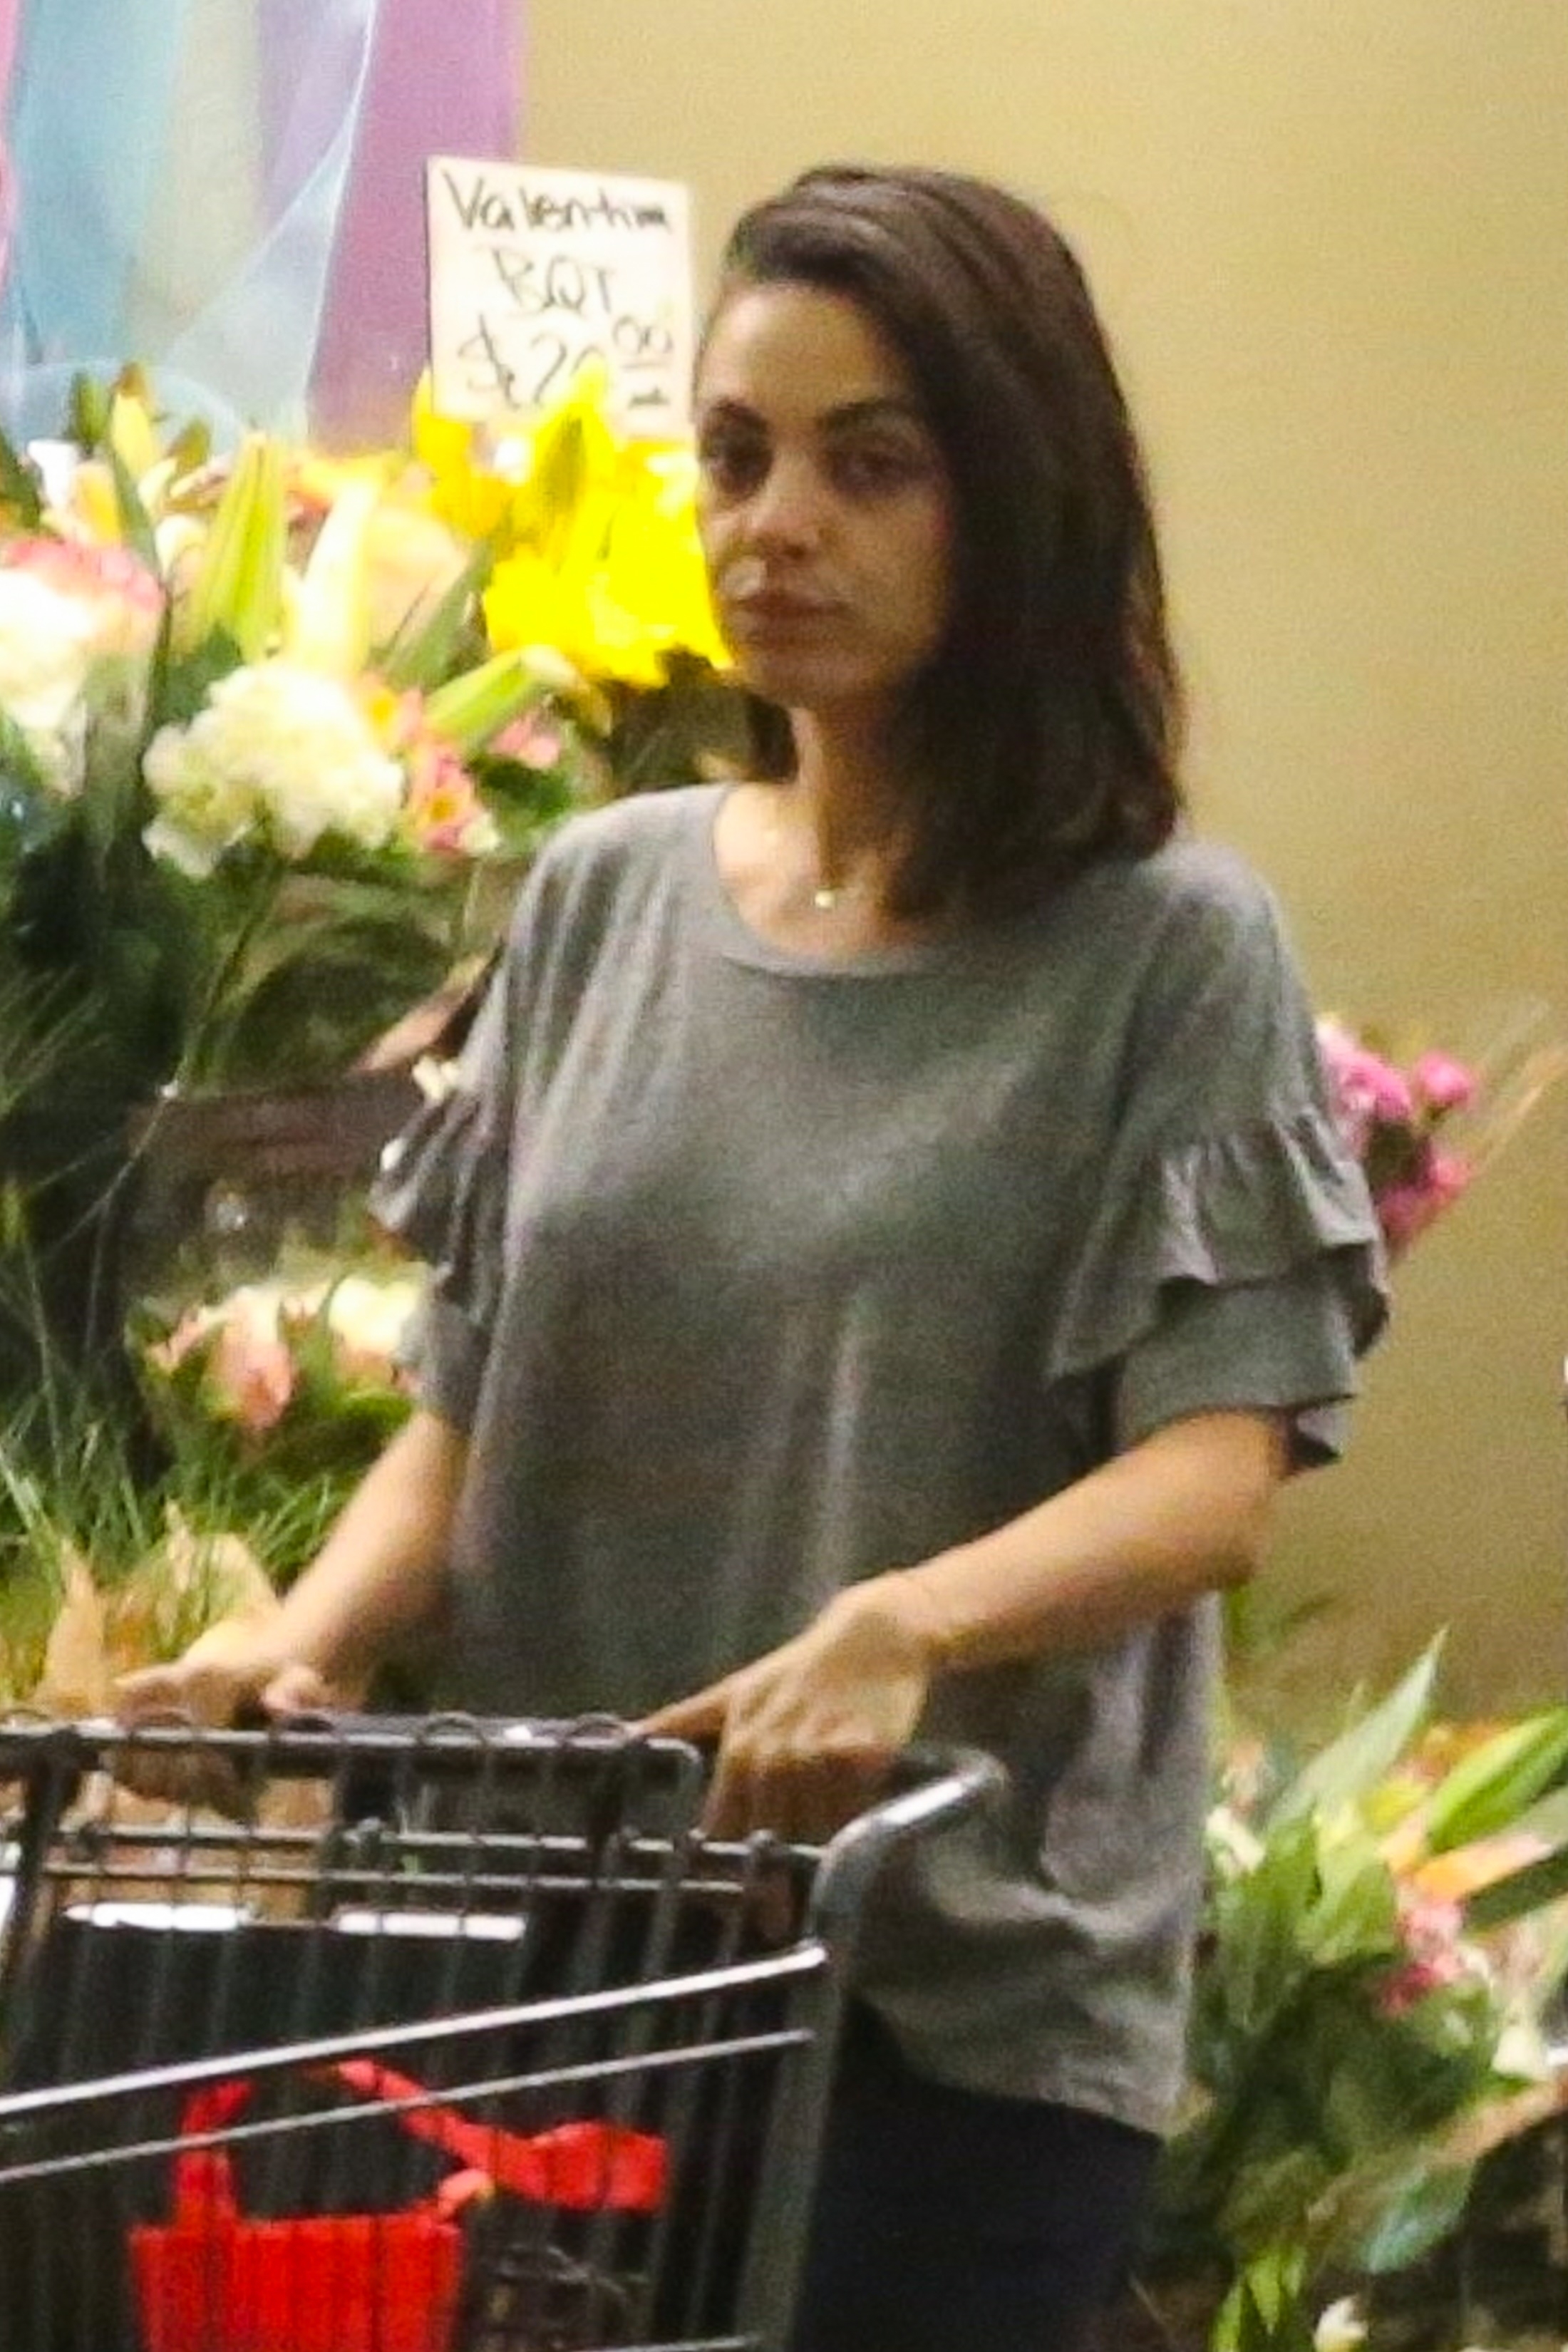 mila-kunis-shopping-at-whole-foods-in-beverly-hills-32918-3.jpg